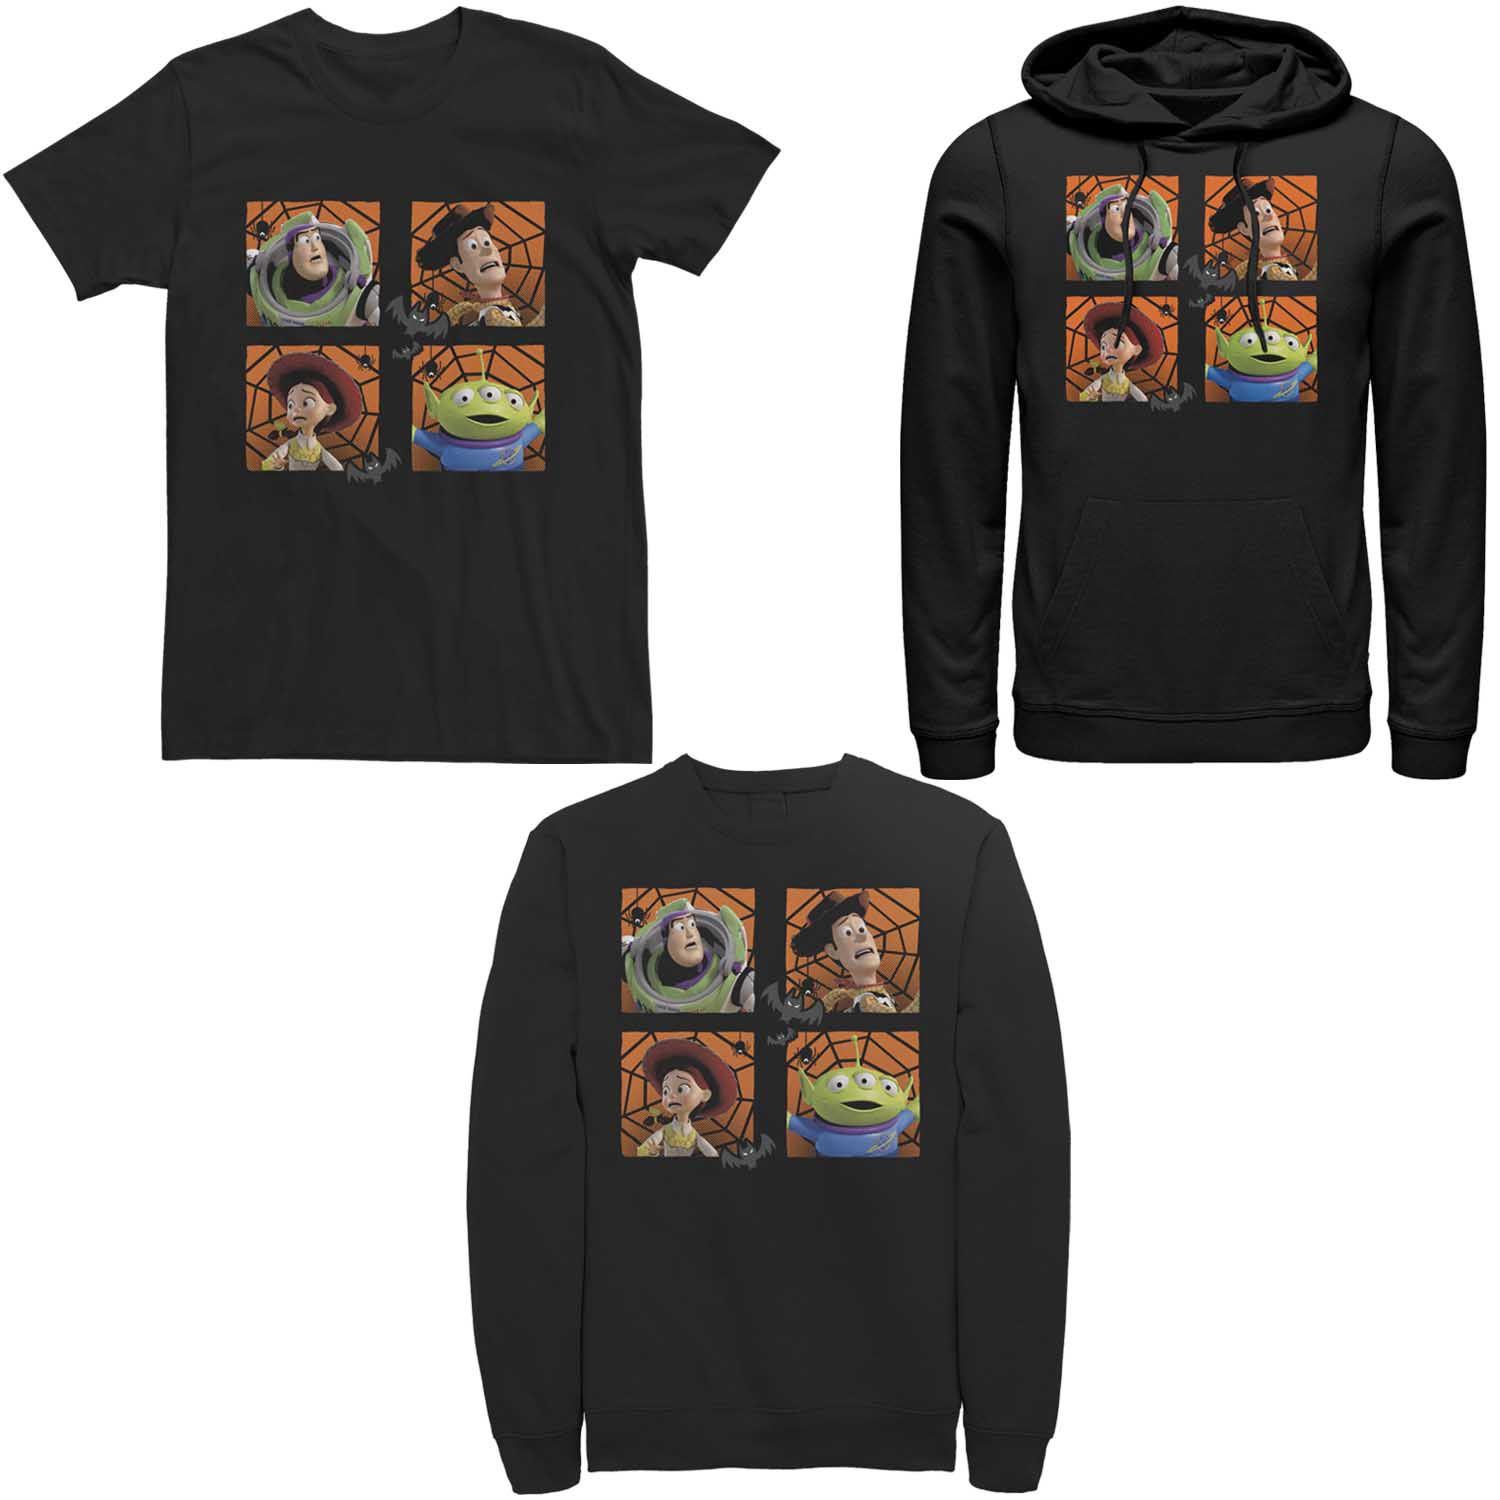 Image for Disney / Pixar Men's Toy Story Trick-or-Treat Halloween Tops at Kohl's.